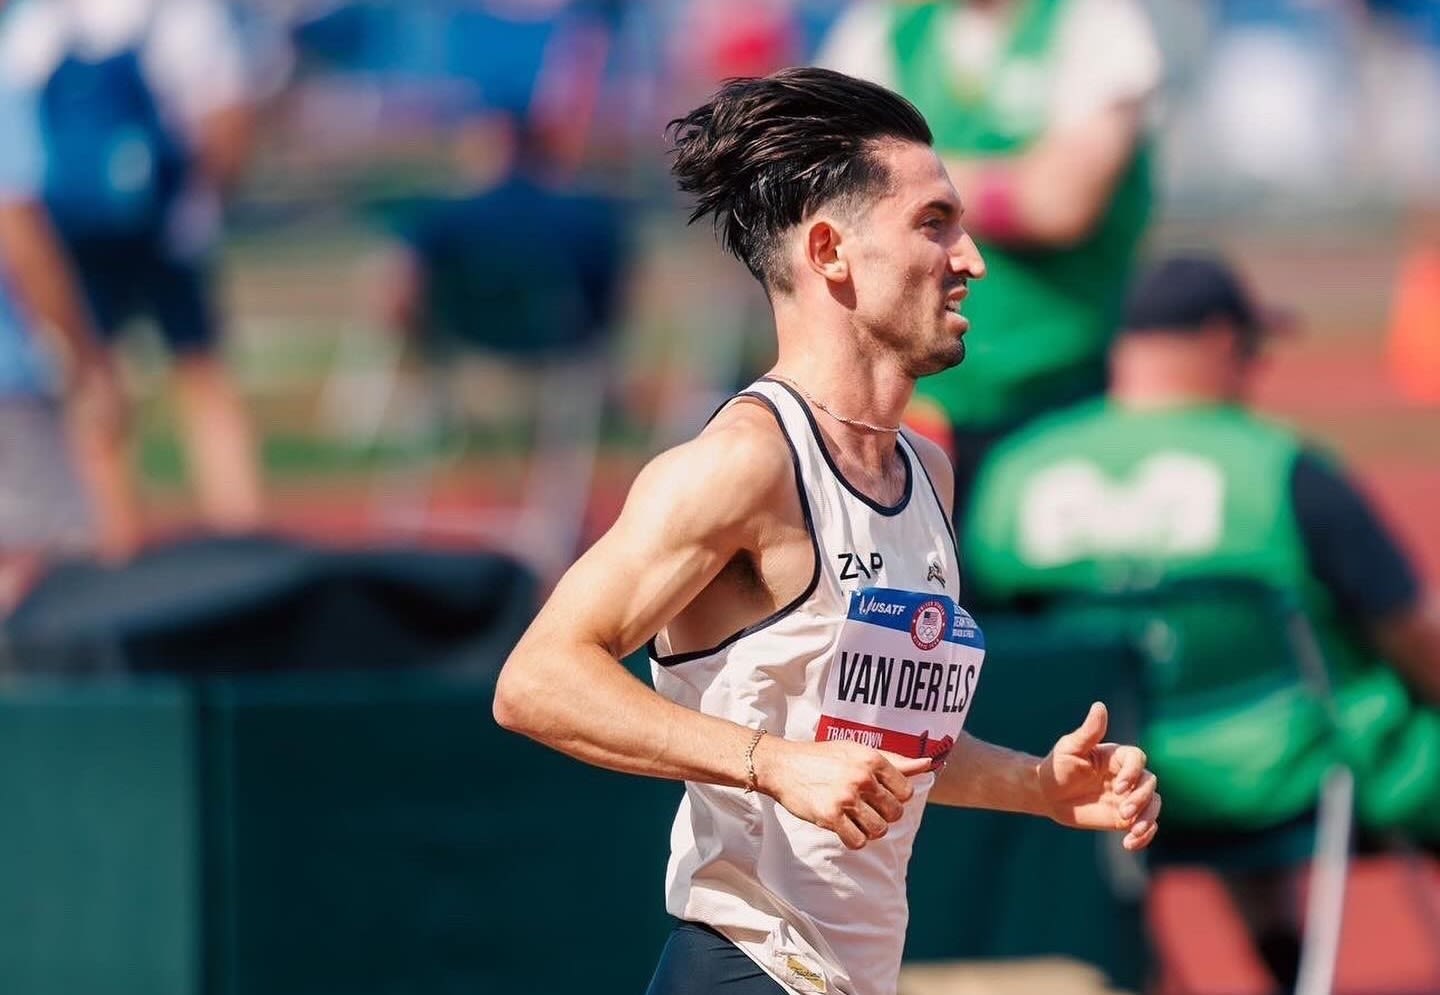 Norwalk, UConn grad beats injury to race 5,000 meters at Olympic Trials: 'I knew I was capable'